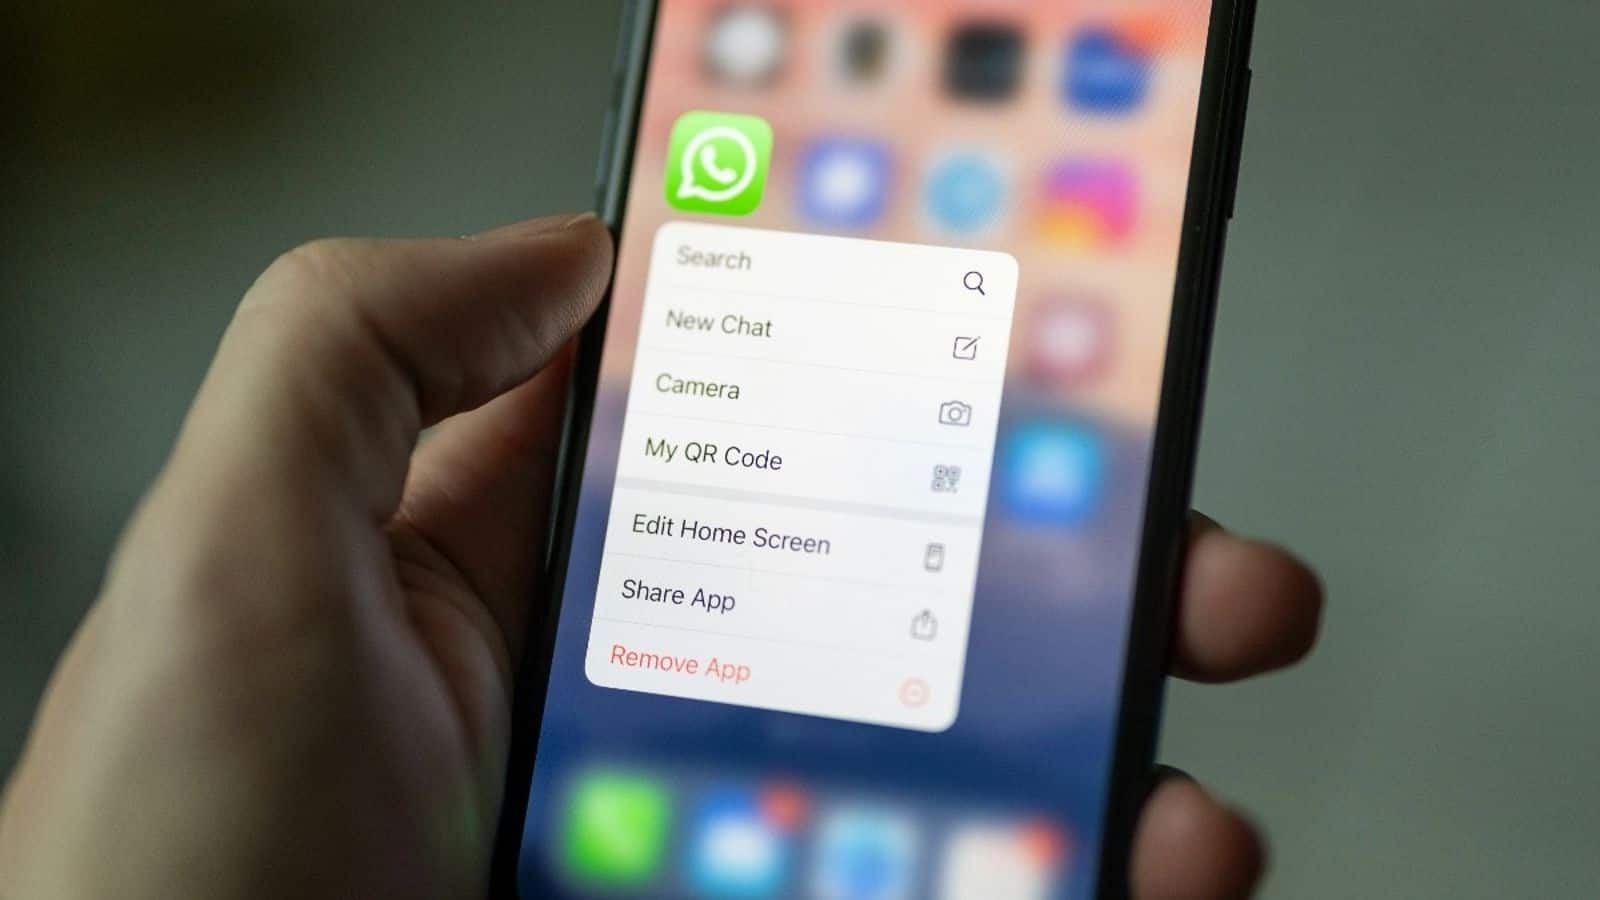 WhatsApp's new feature will let you share files without internet